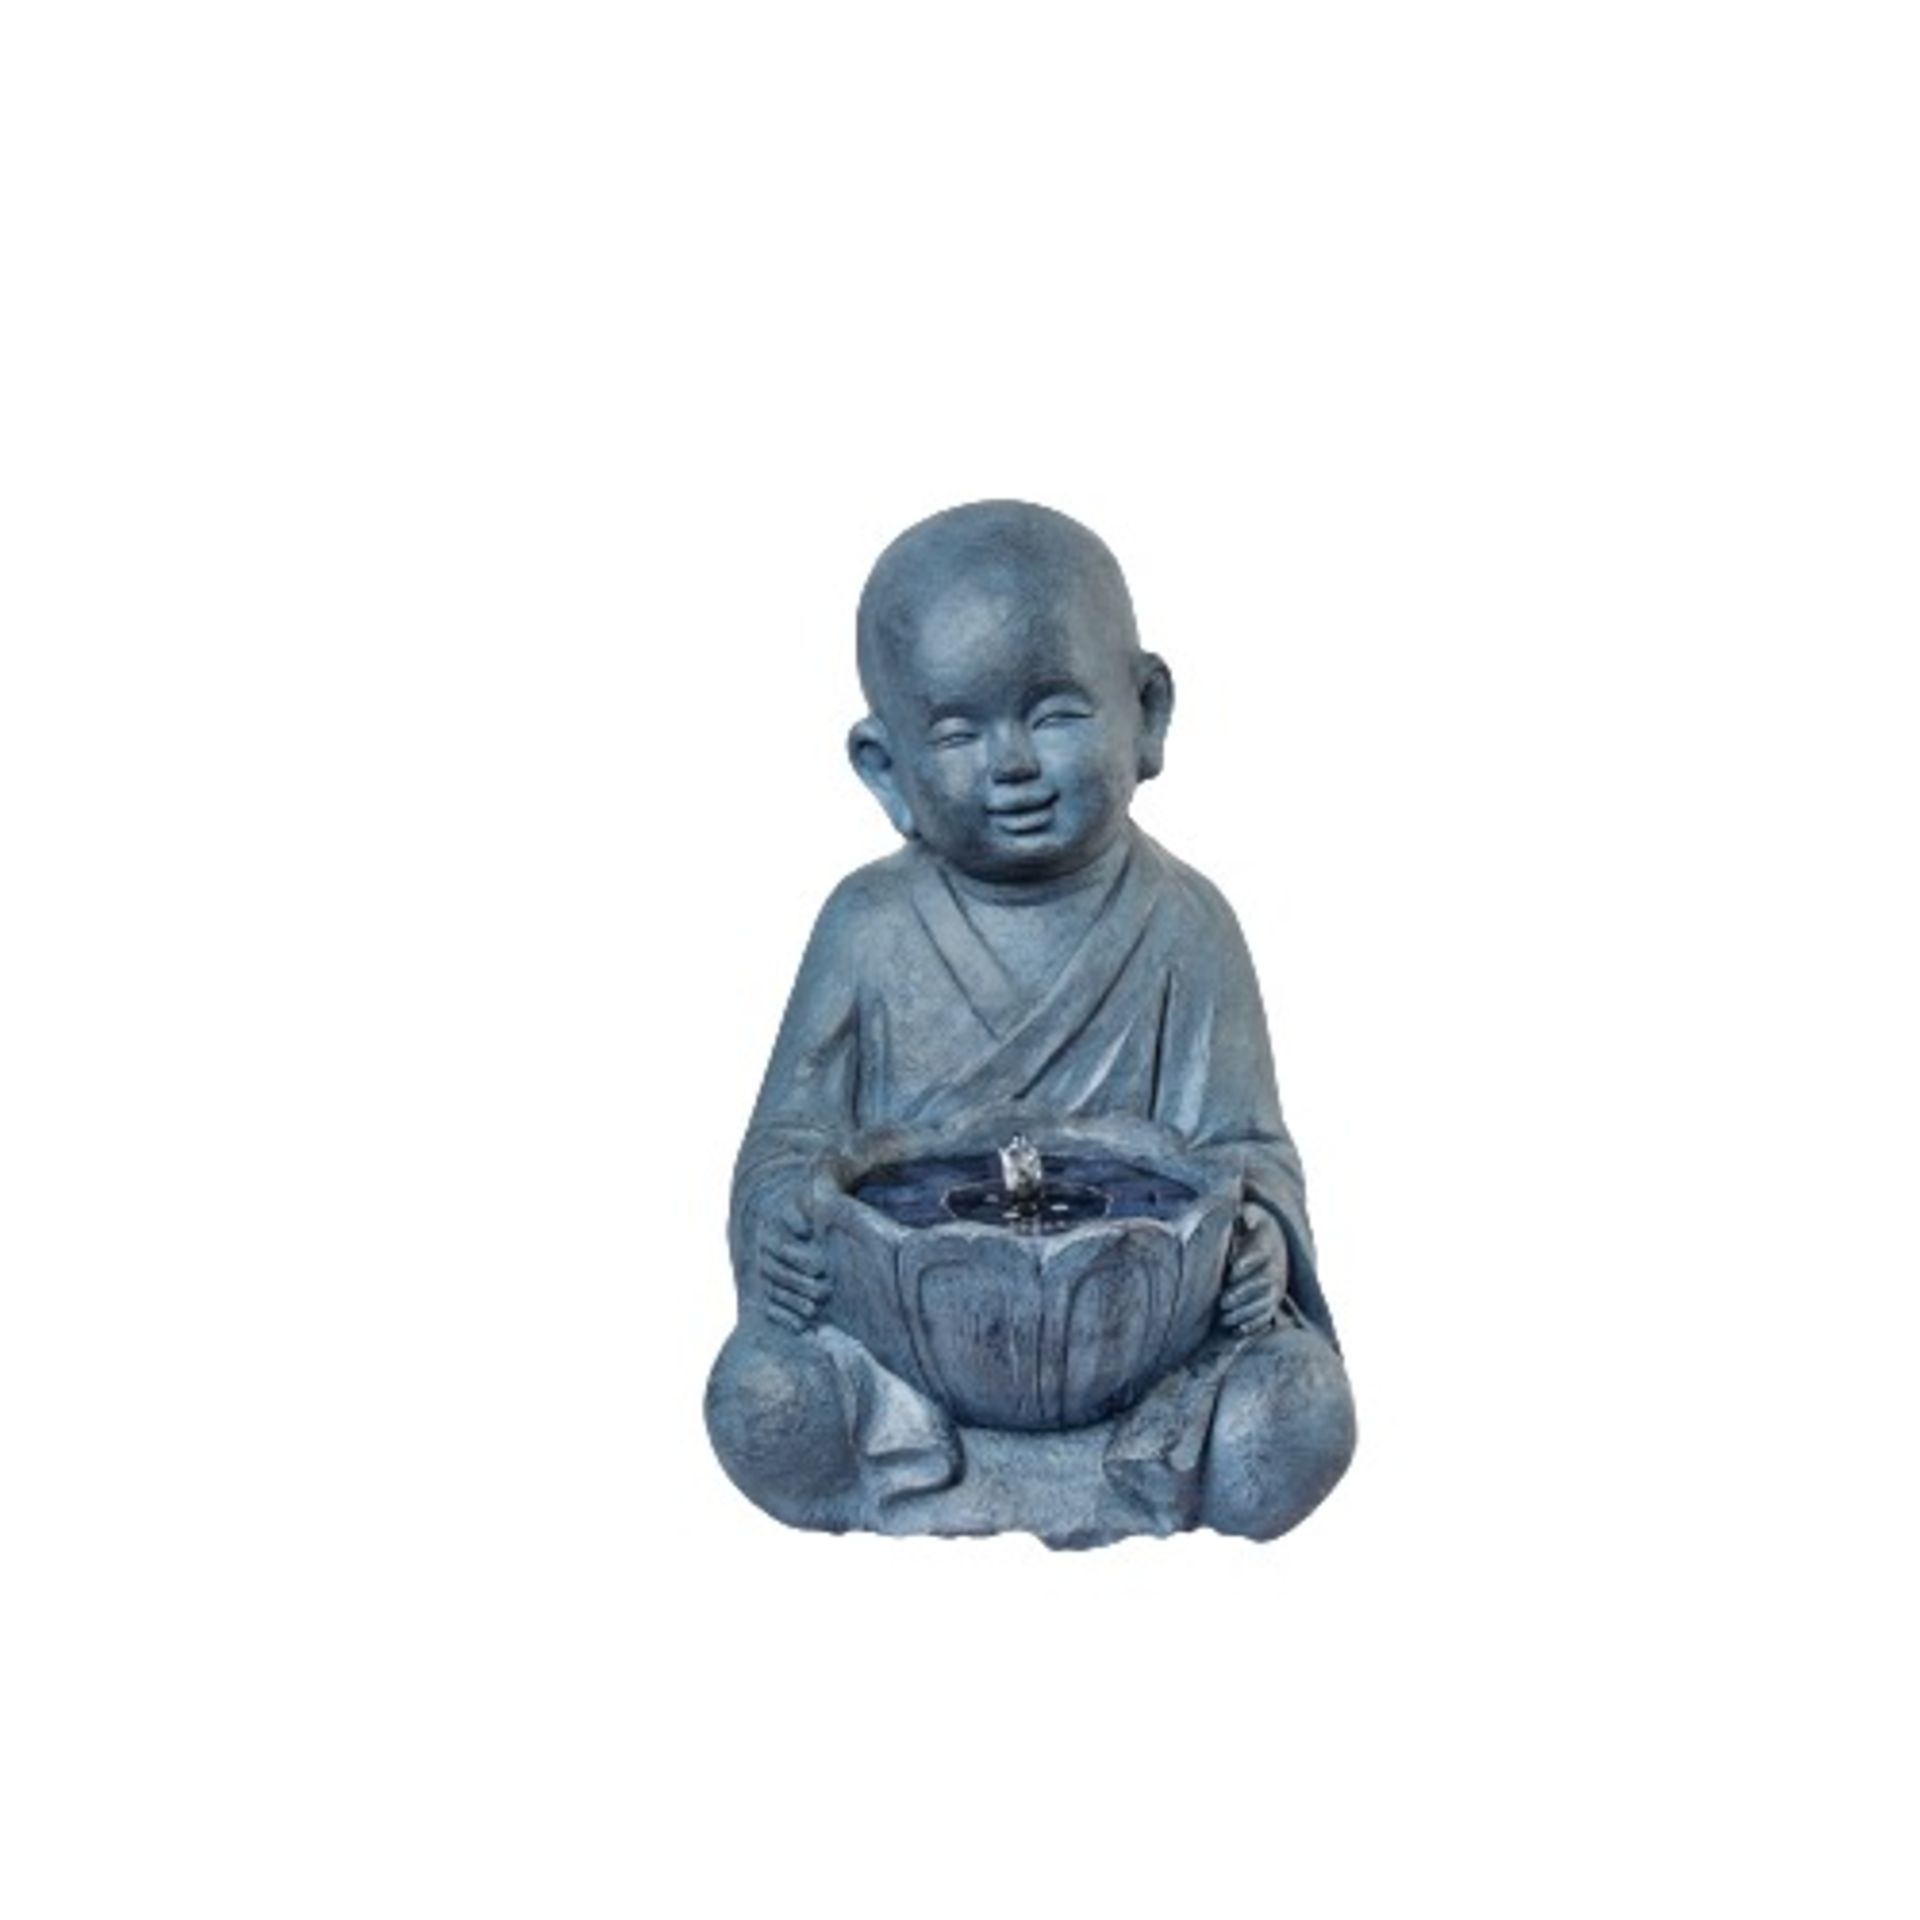 BRAND NEW BABY BUDDHA WATER FEATURE SOLAR ON DEMAND WITH WARM WHITE LED LIGHTS